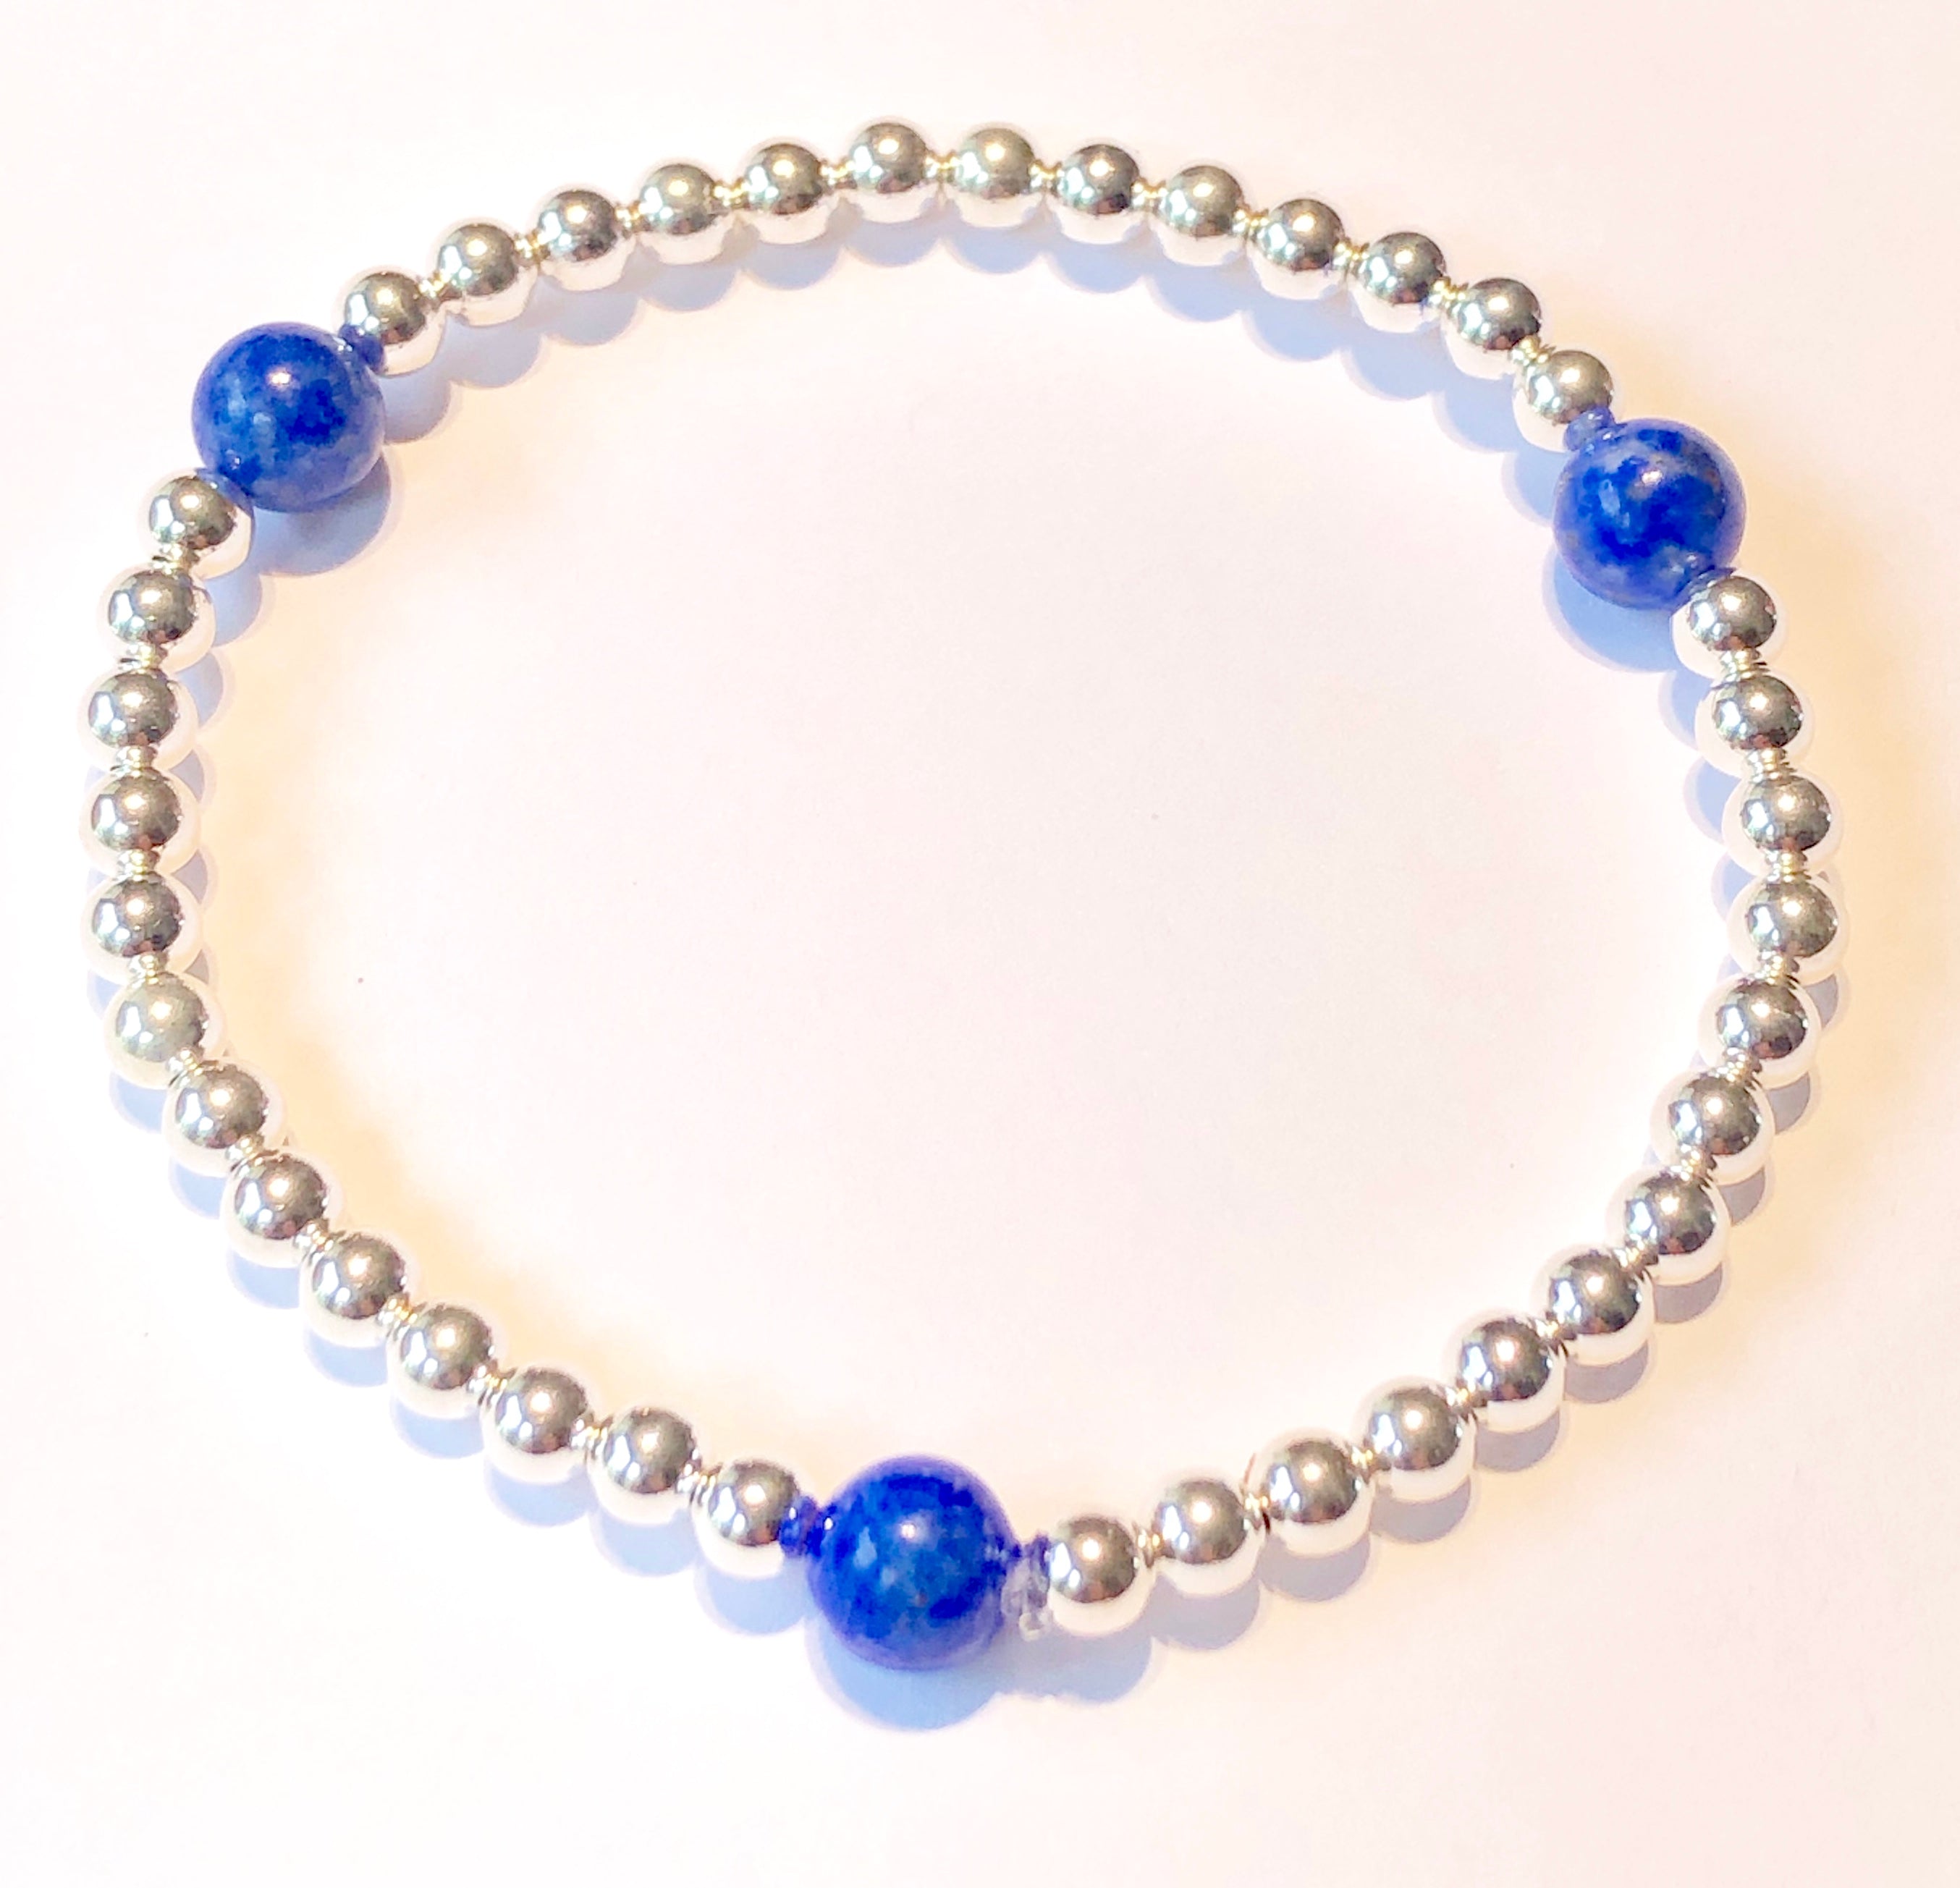 4mm Sterling Silver Bead Bracelet with 3 6mm Lapis Beads